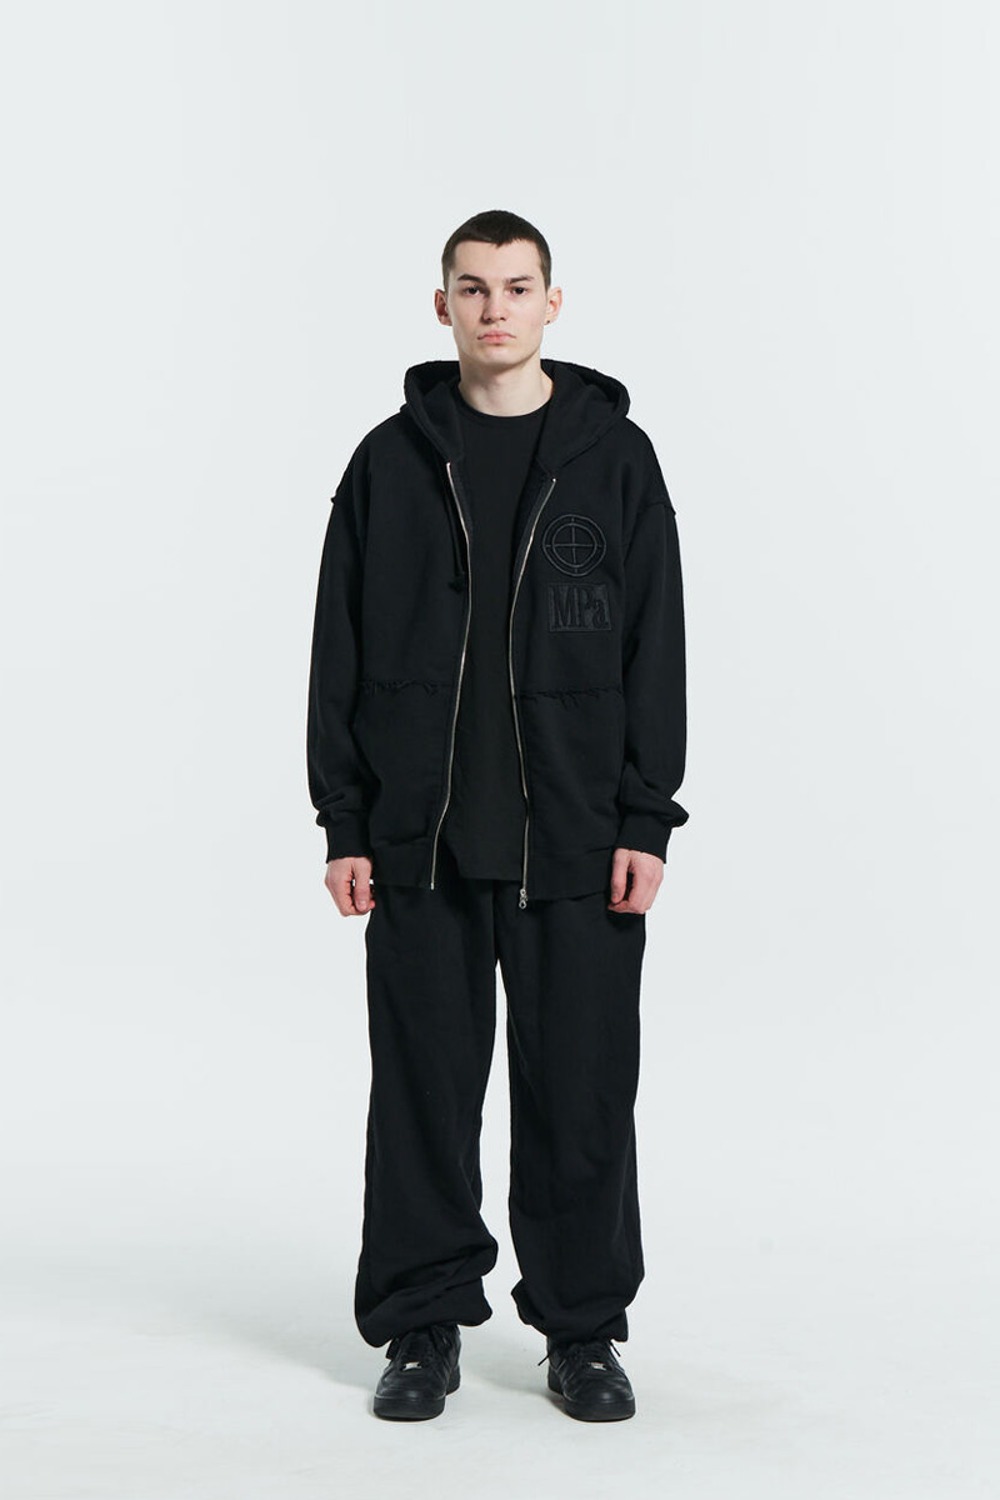 MPa SCRATCHED ZIPPED HOODIE (BLACK)